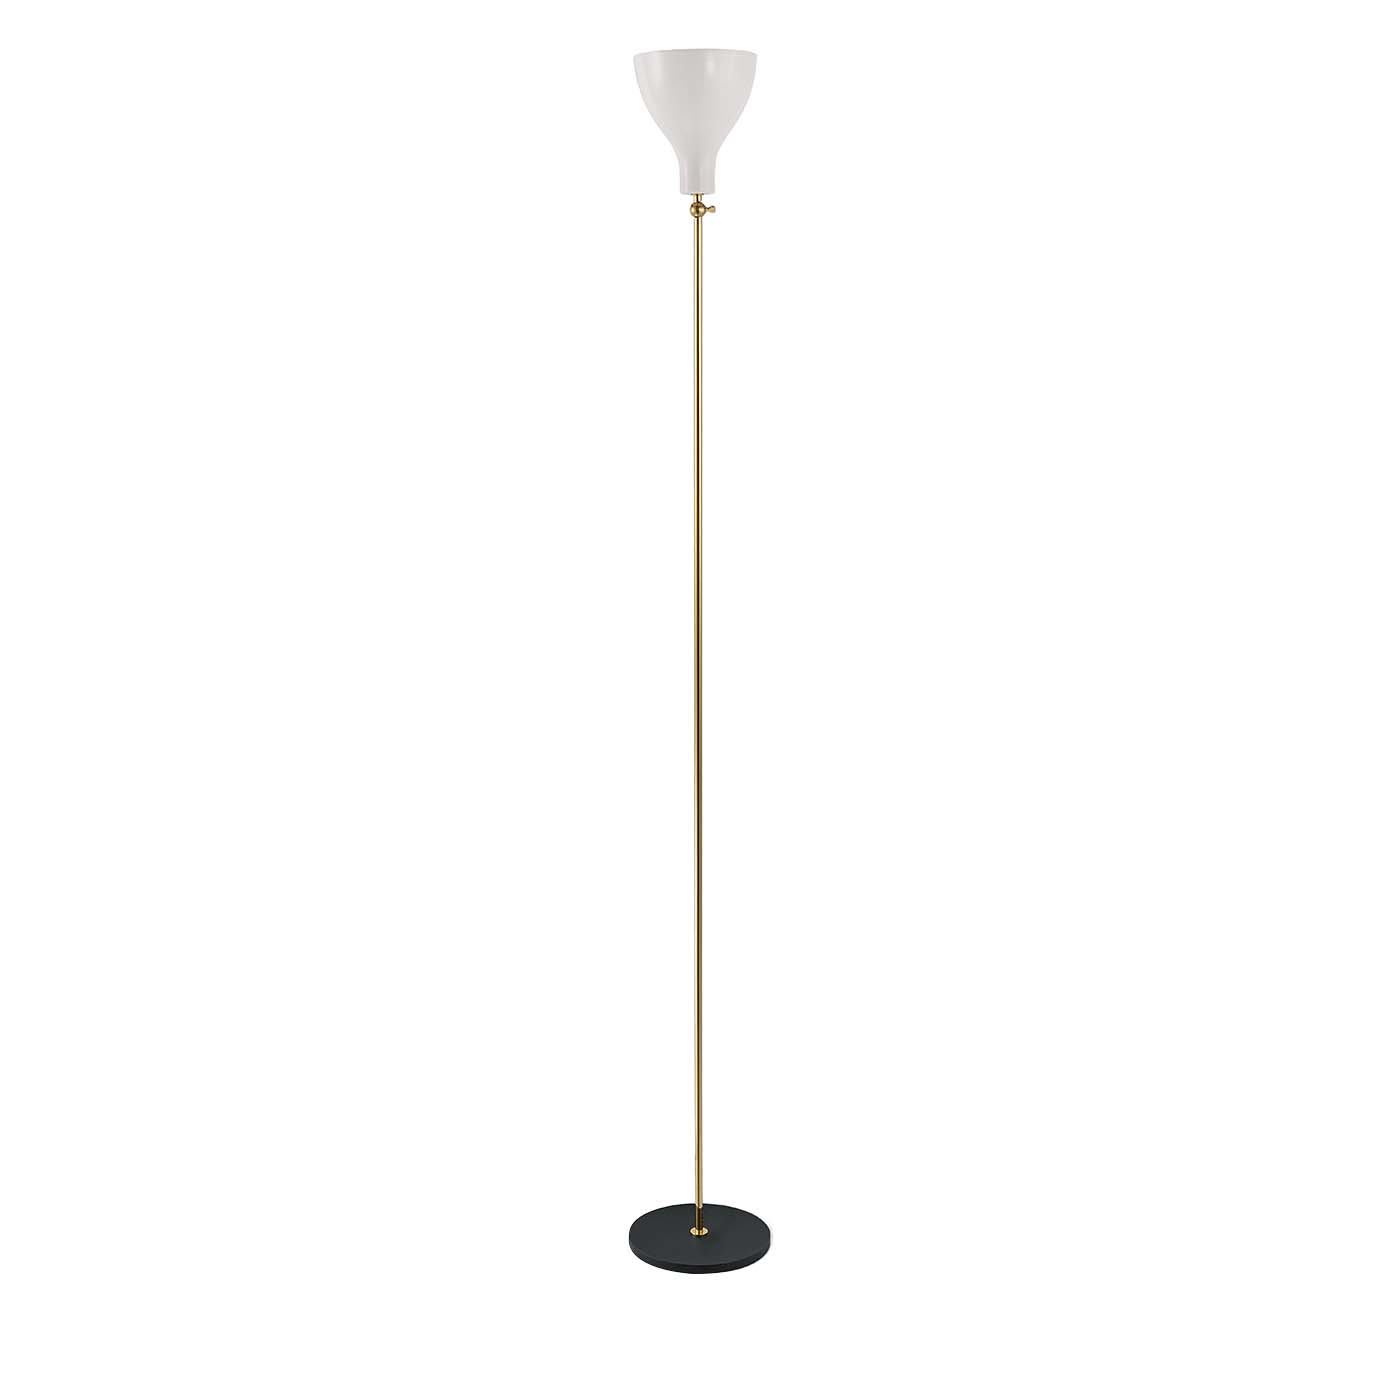 Lady V Black and White Tall Floor Lamp in Brass - Tato